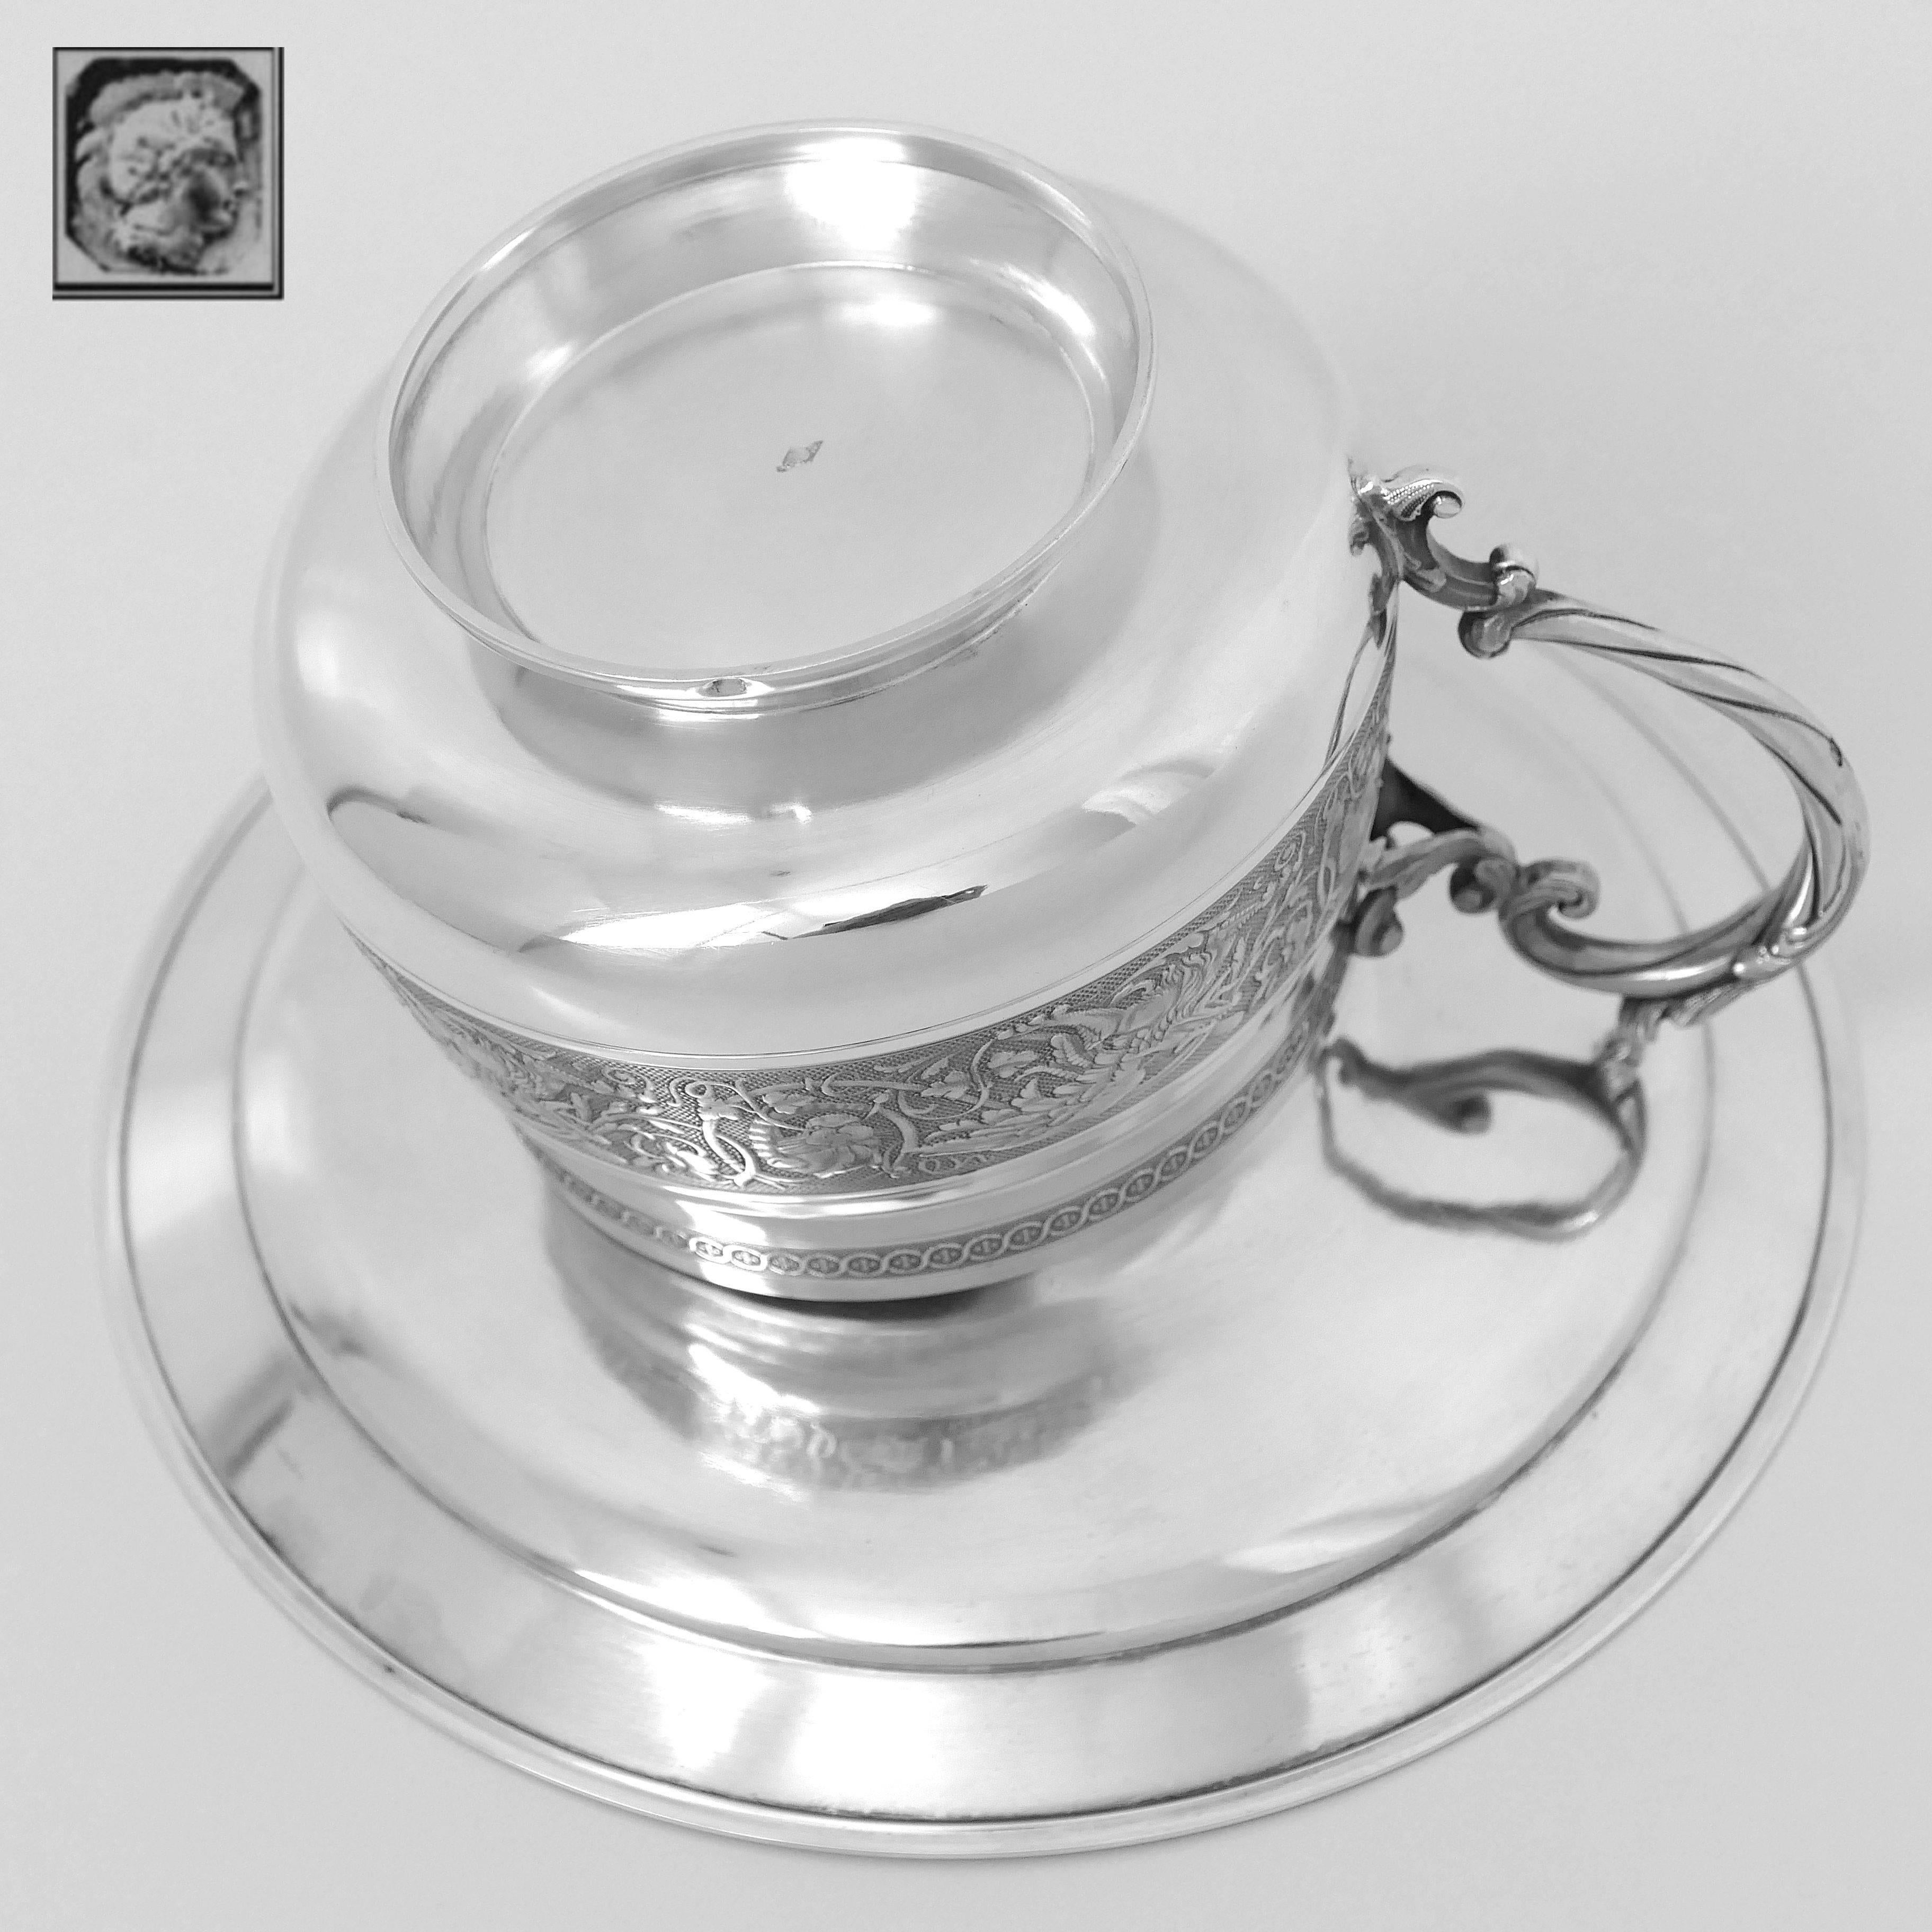 Imposing French Sterling Silver 18-Karat Gold Chocolate Tea Cup & Saucer, Dragon 1